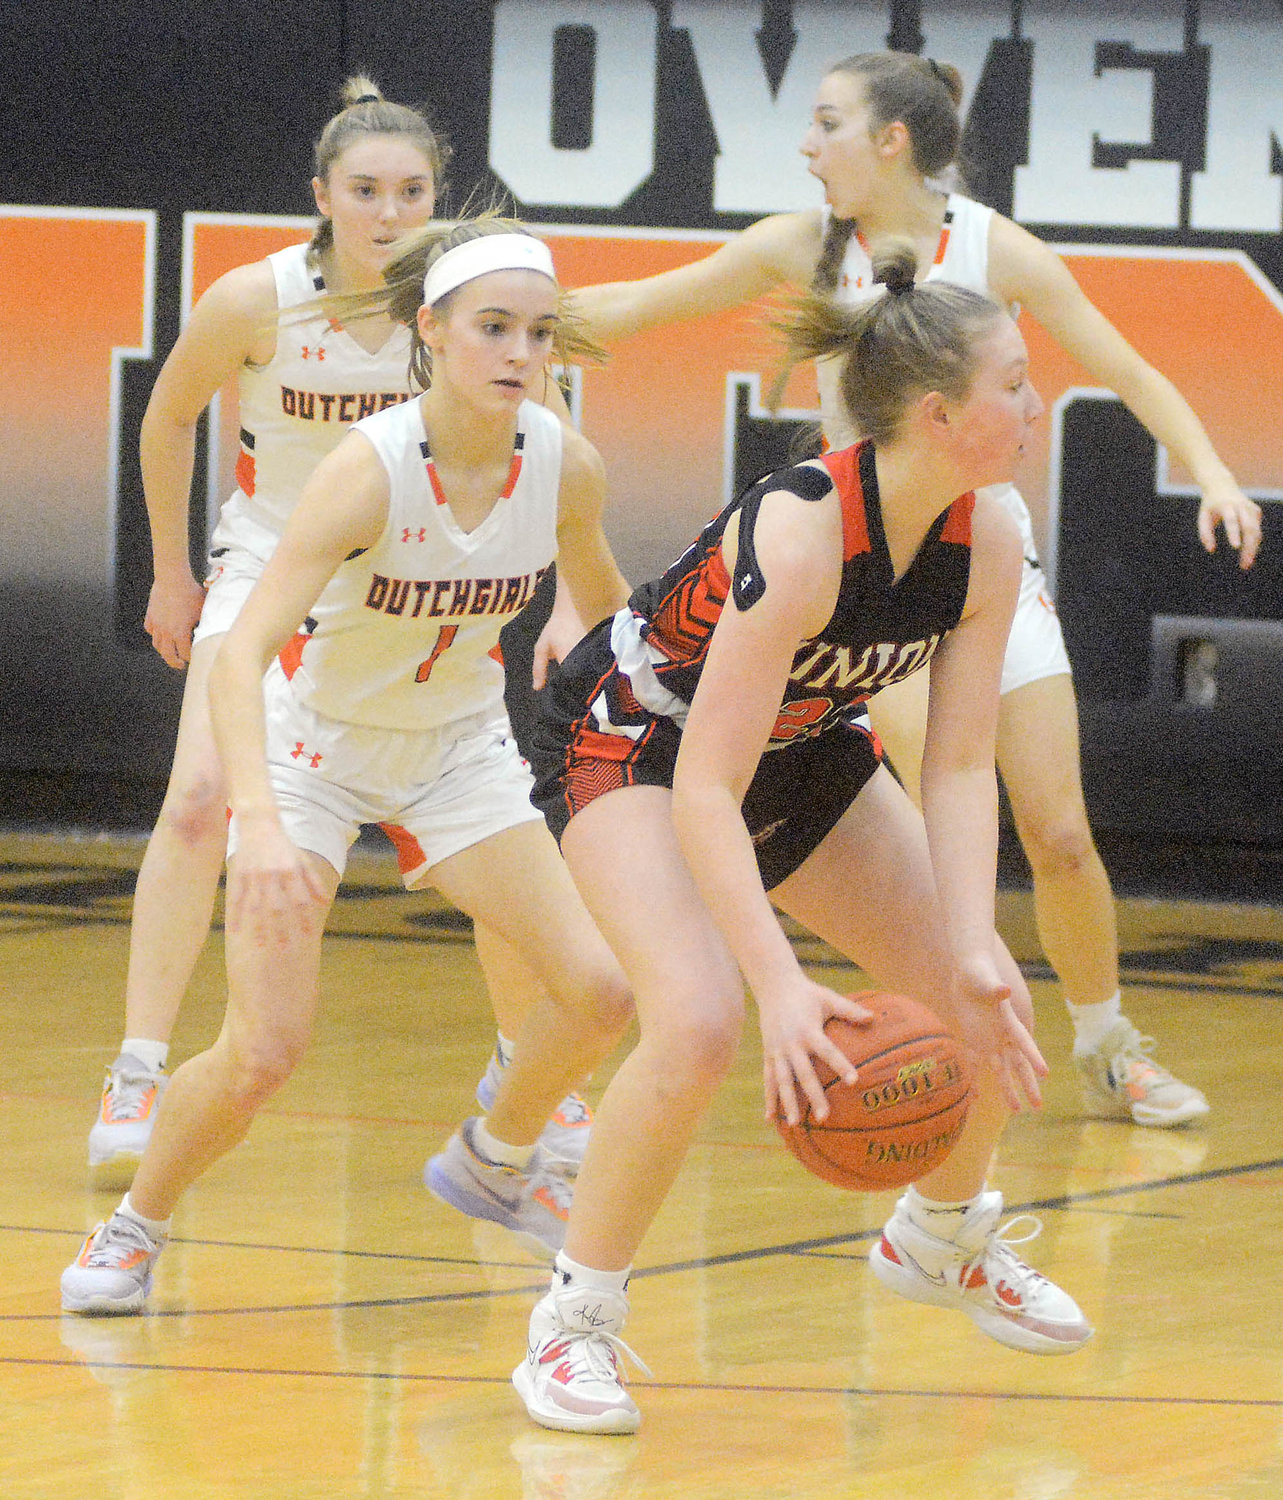 Emma Daniels (far left) keeps her eyes on Union’s Sophia Helling handling the basketball during Four Rivers Conference (FRC) girls basketball action at Owensville High School back in mid-February.